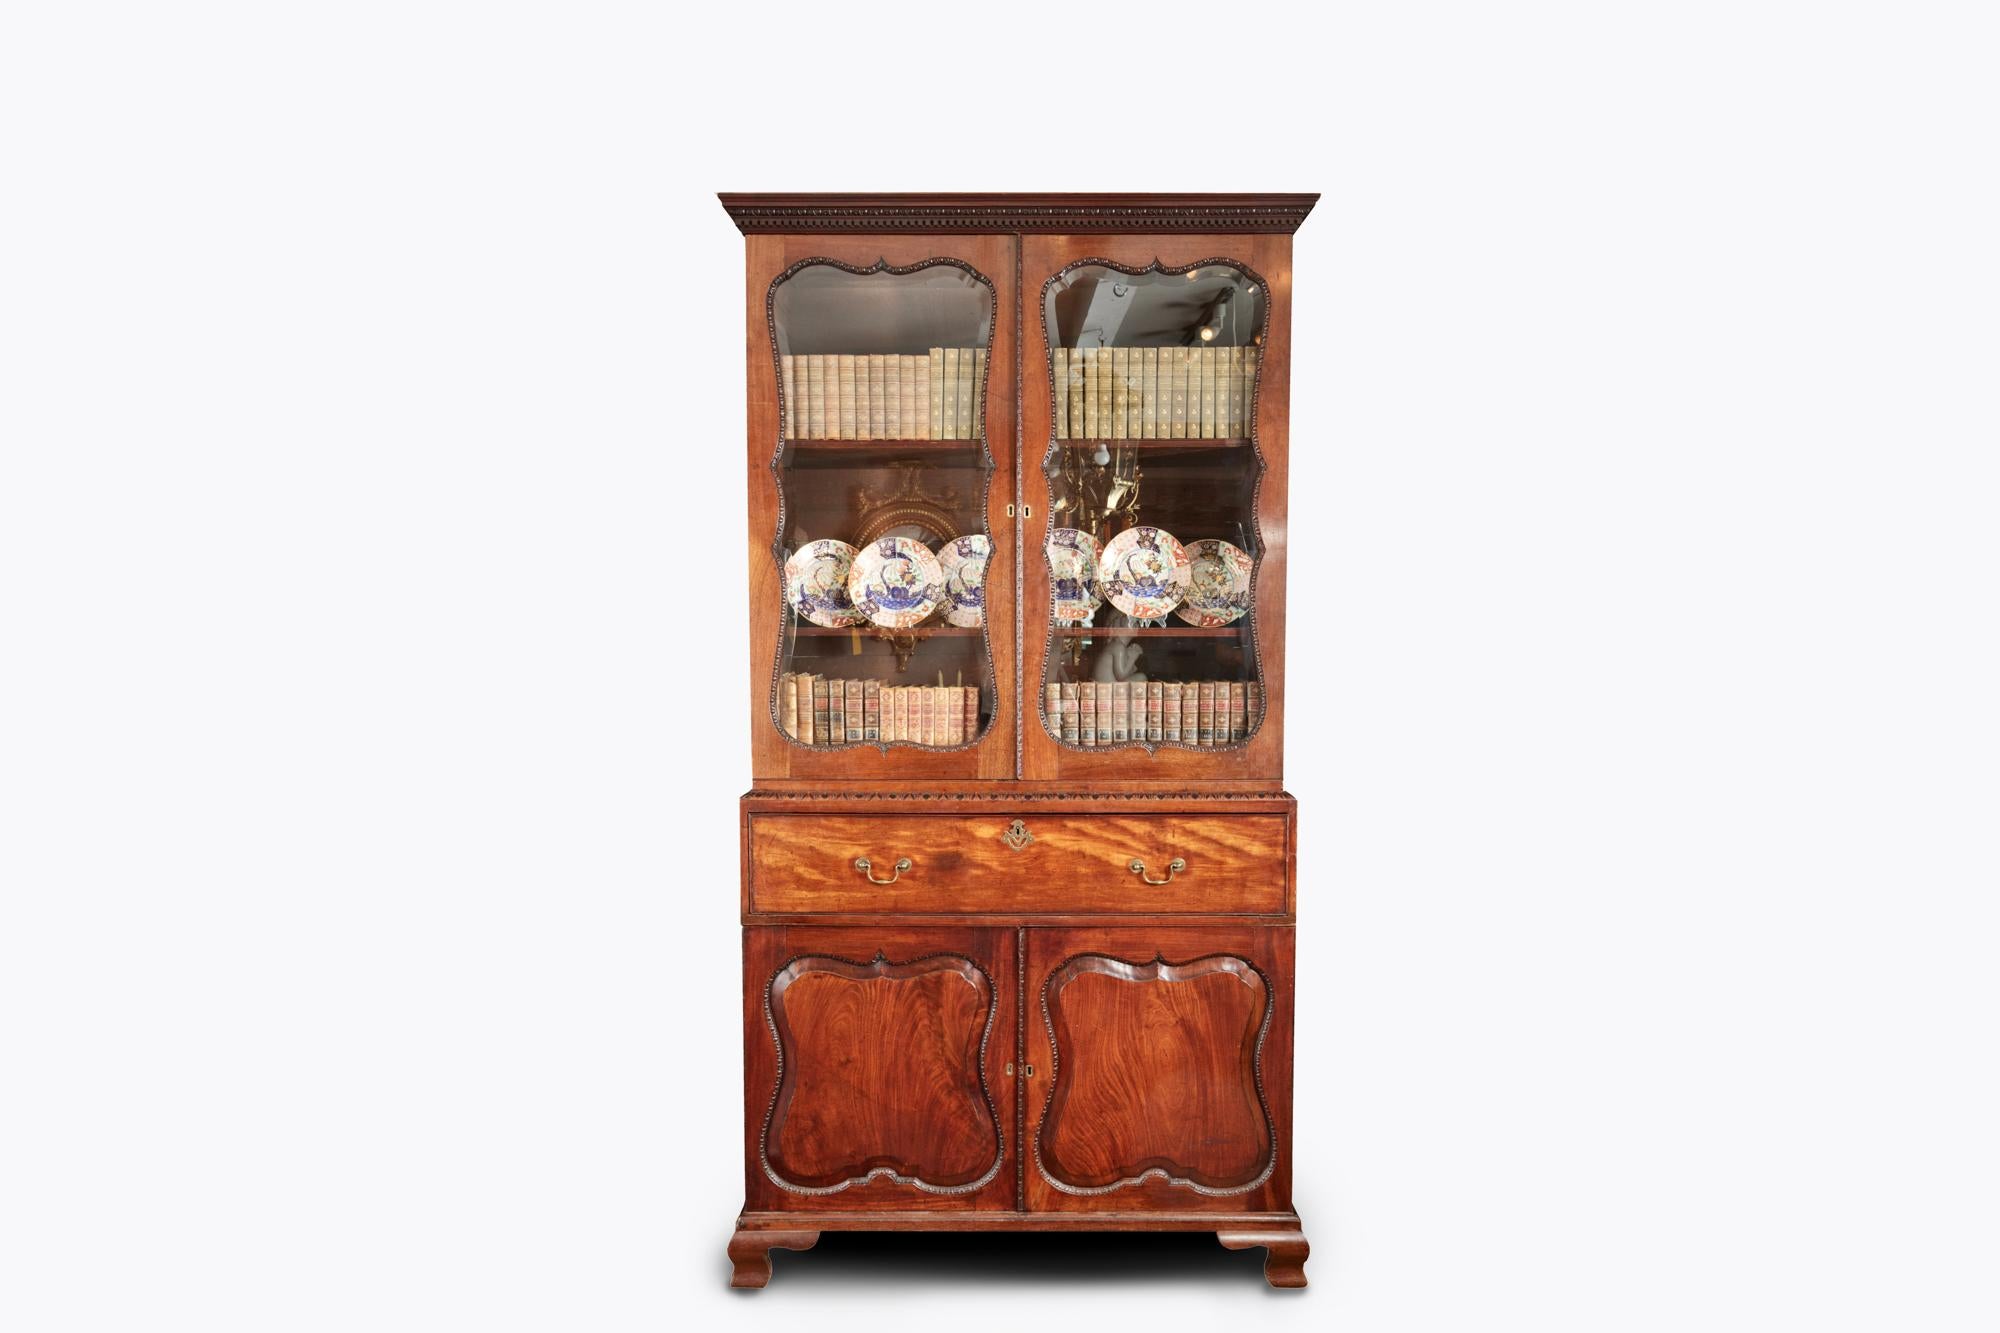 18th century George II mahogany secretaire bookcase attributed to Giles Grendy (1693-1780). Featuring a cornice with egg and dart and dentil mouldings, above a pair of doors with cartouche-shaped bevelled glass panels, outlined with conforming egg